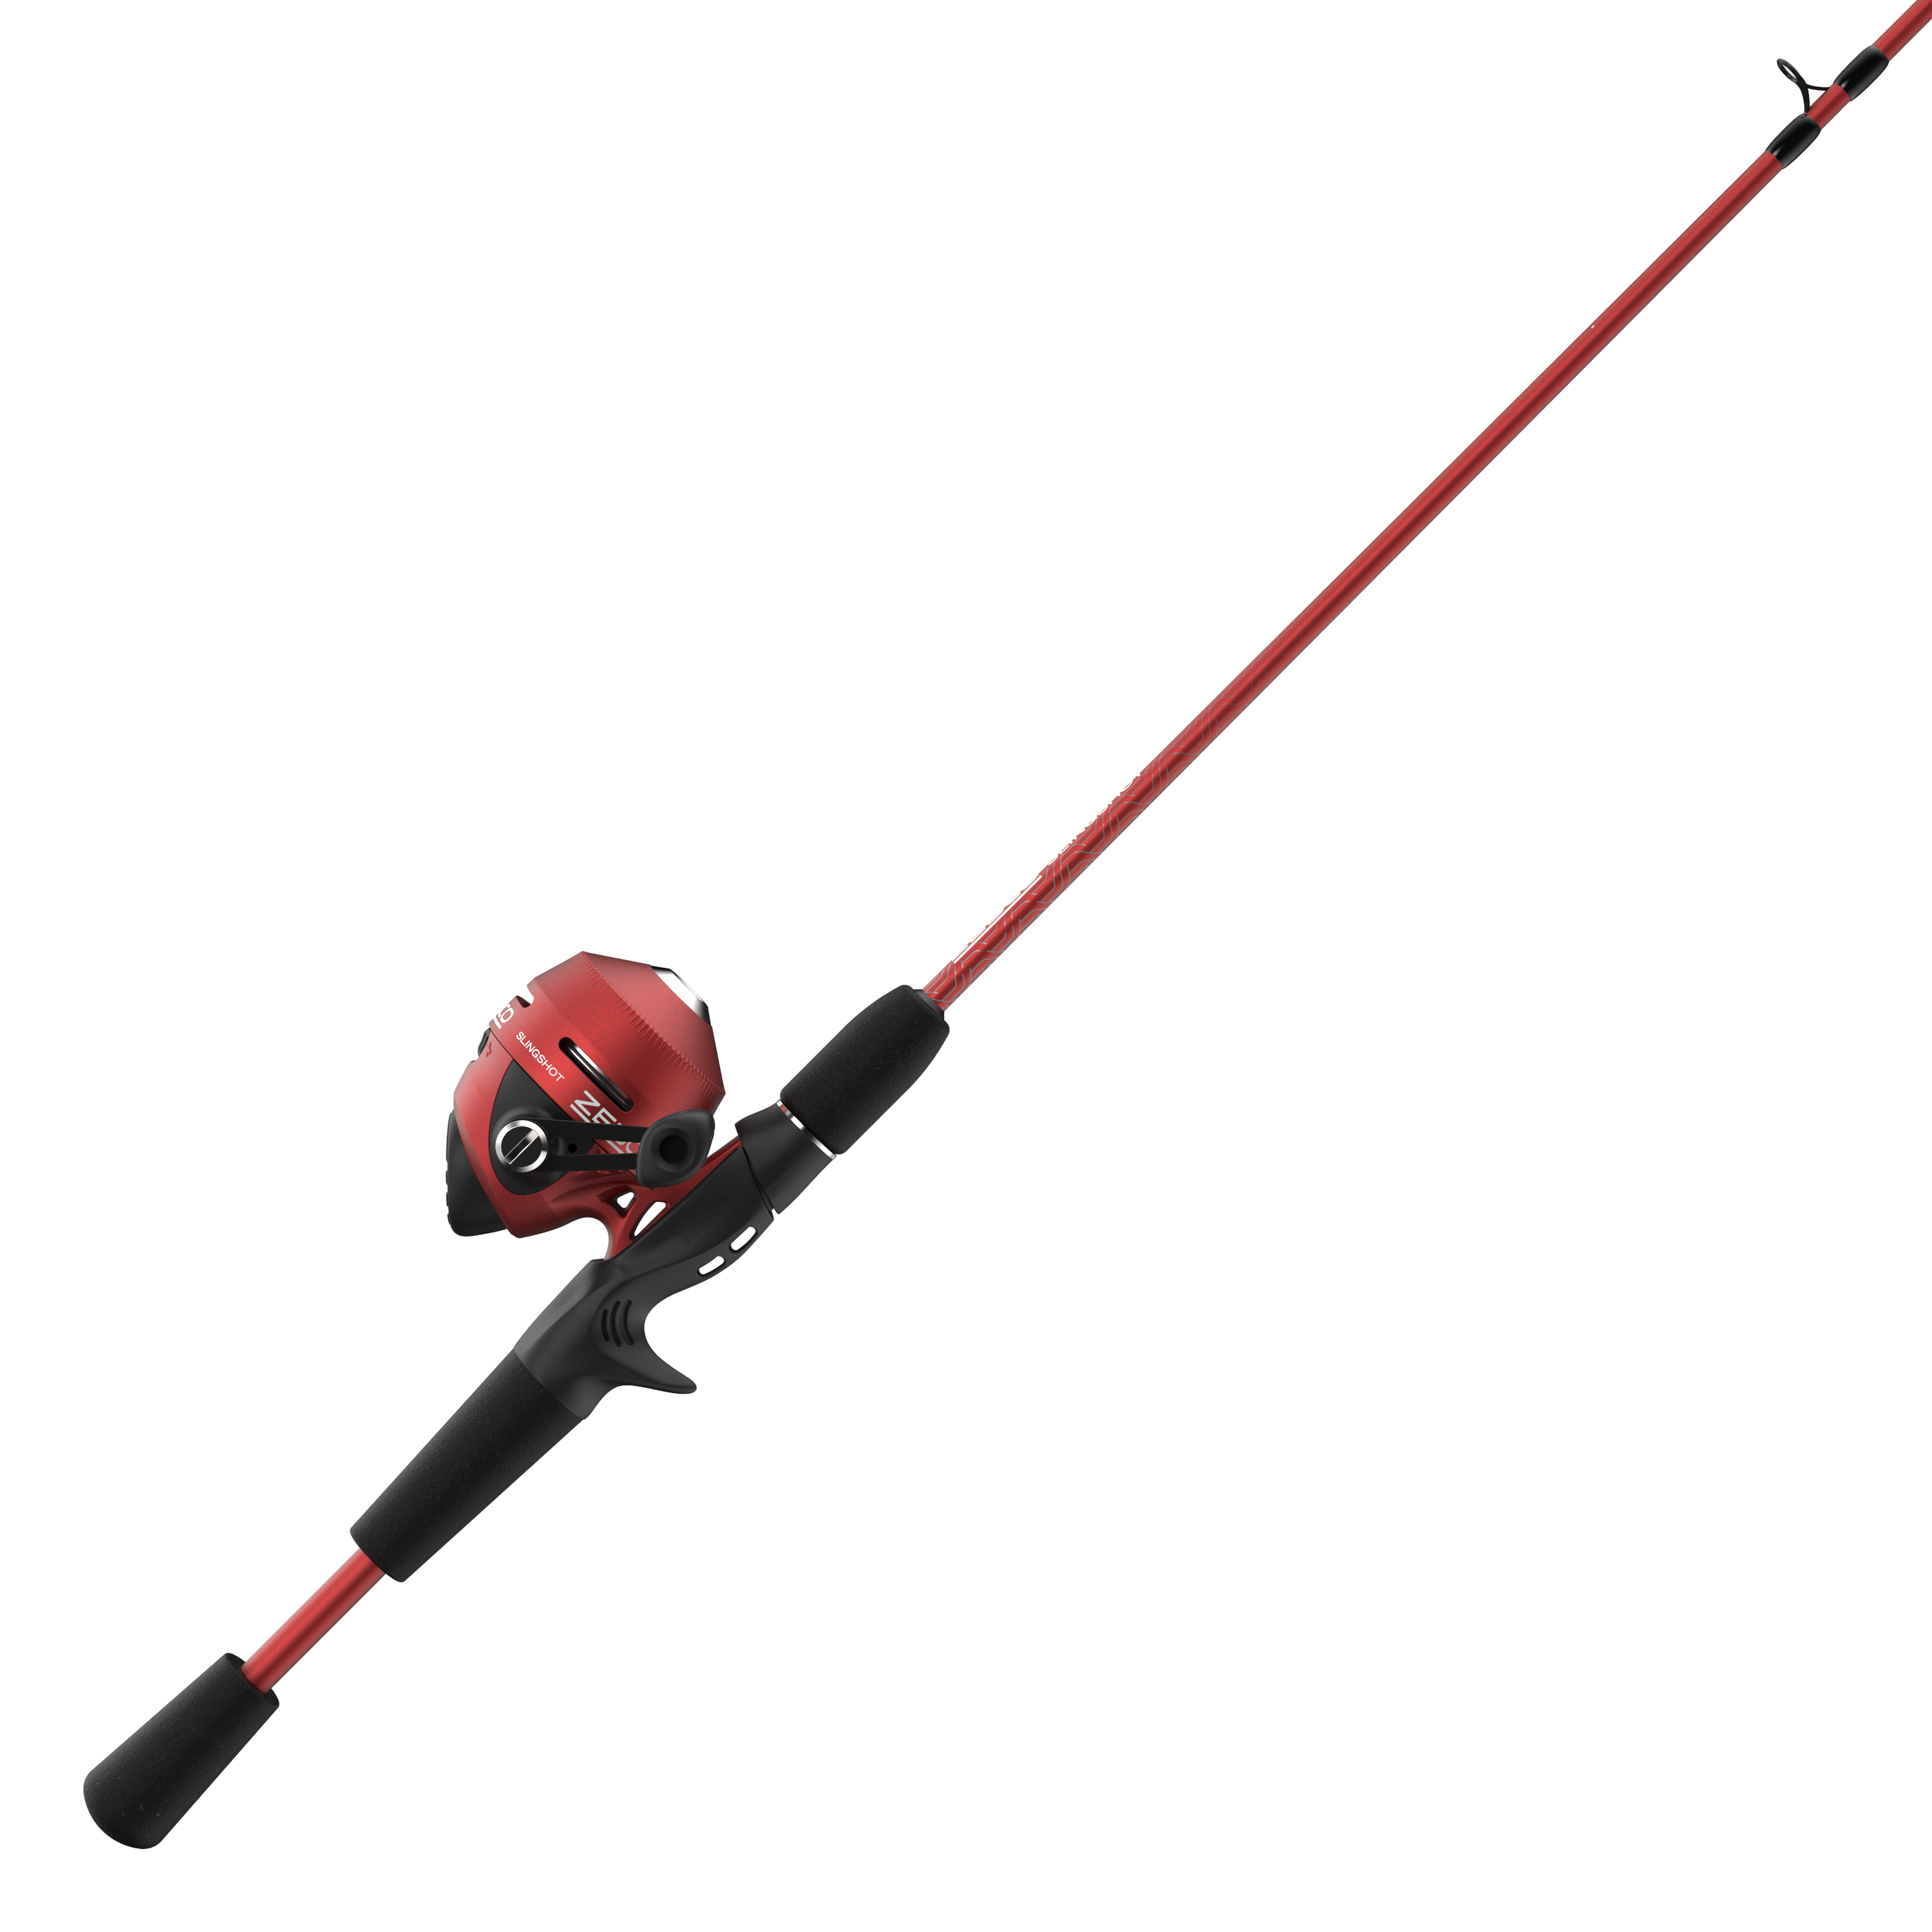 How to Use the Fishing Pole Zebco 202 